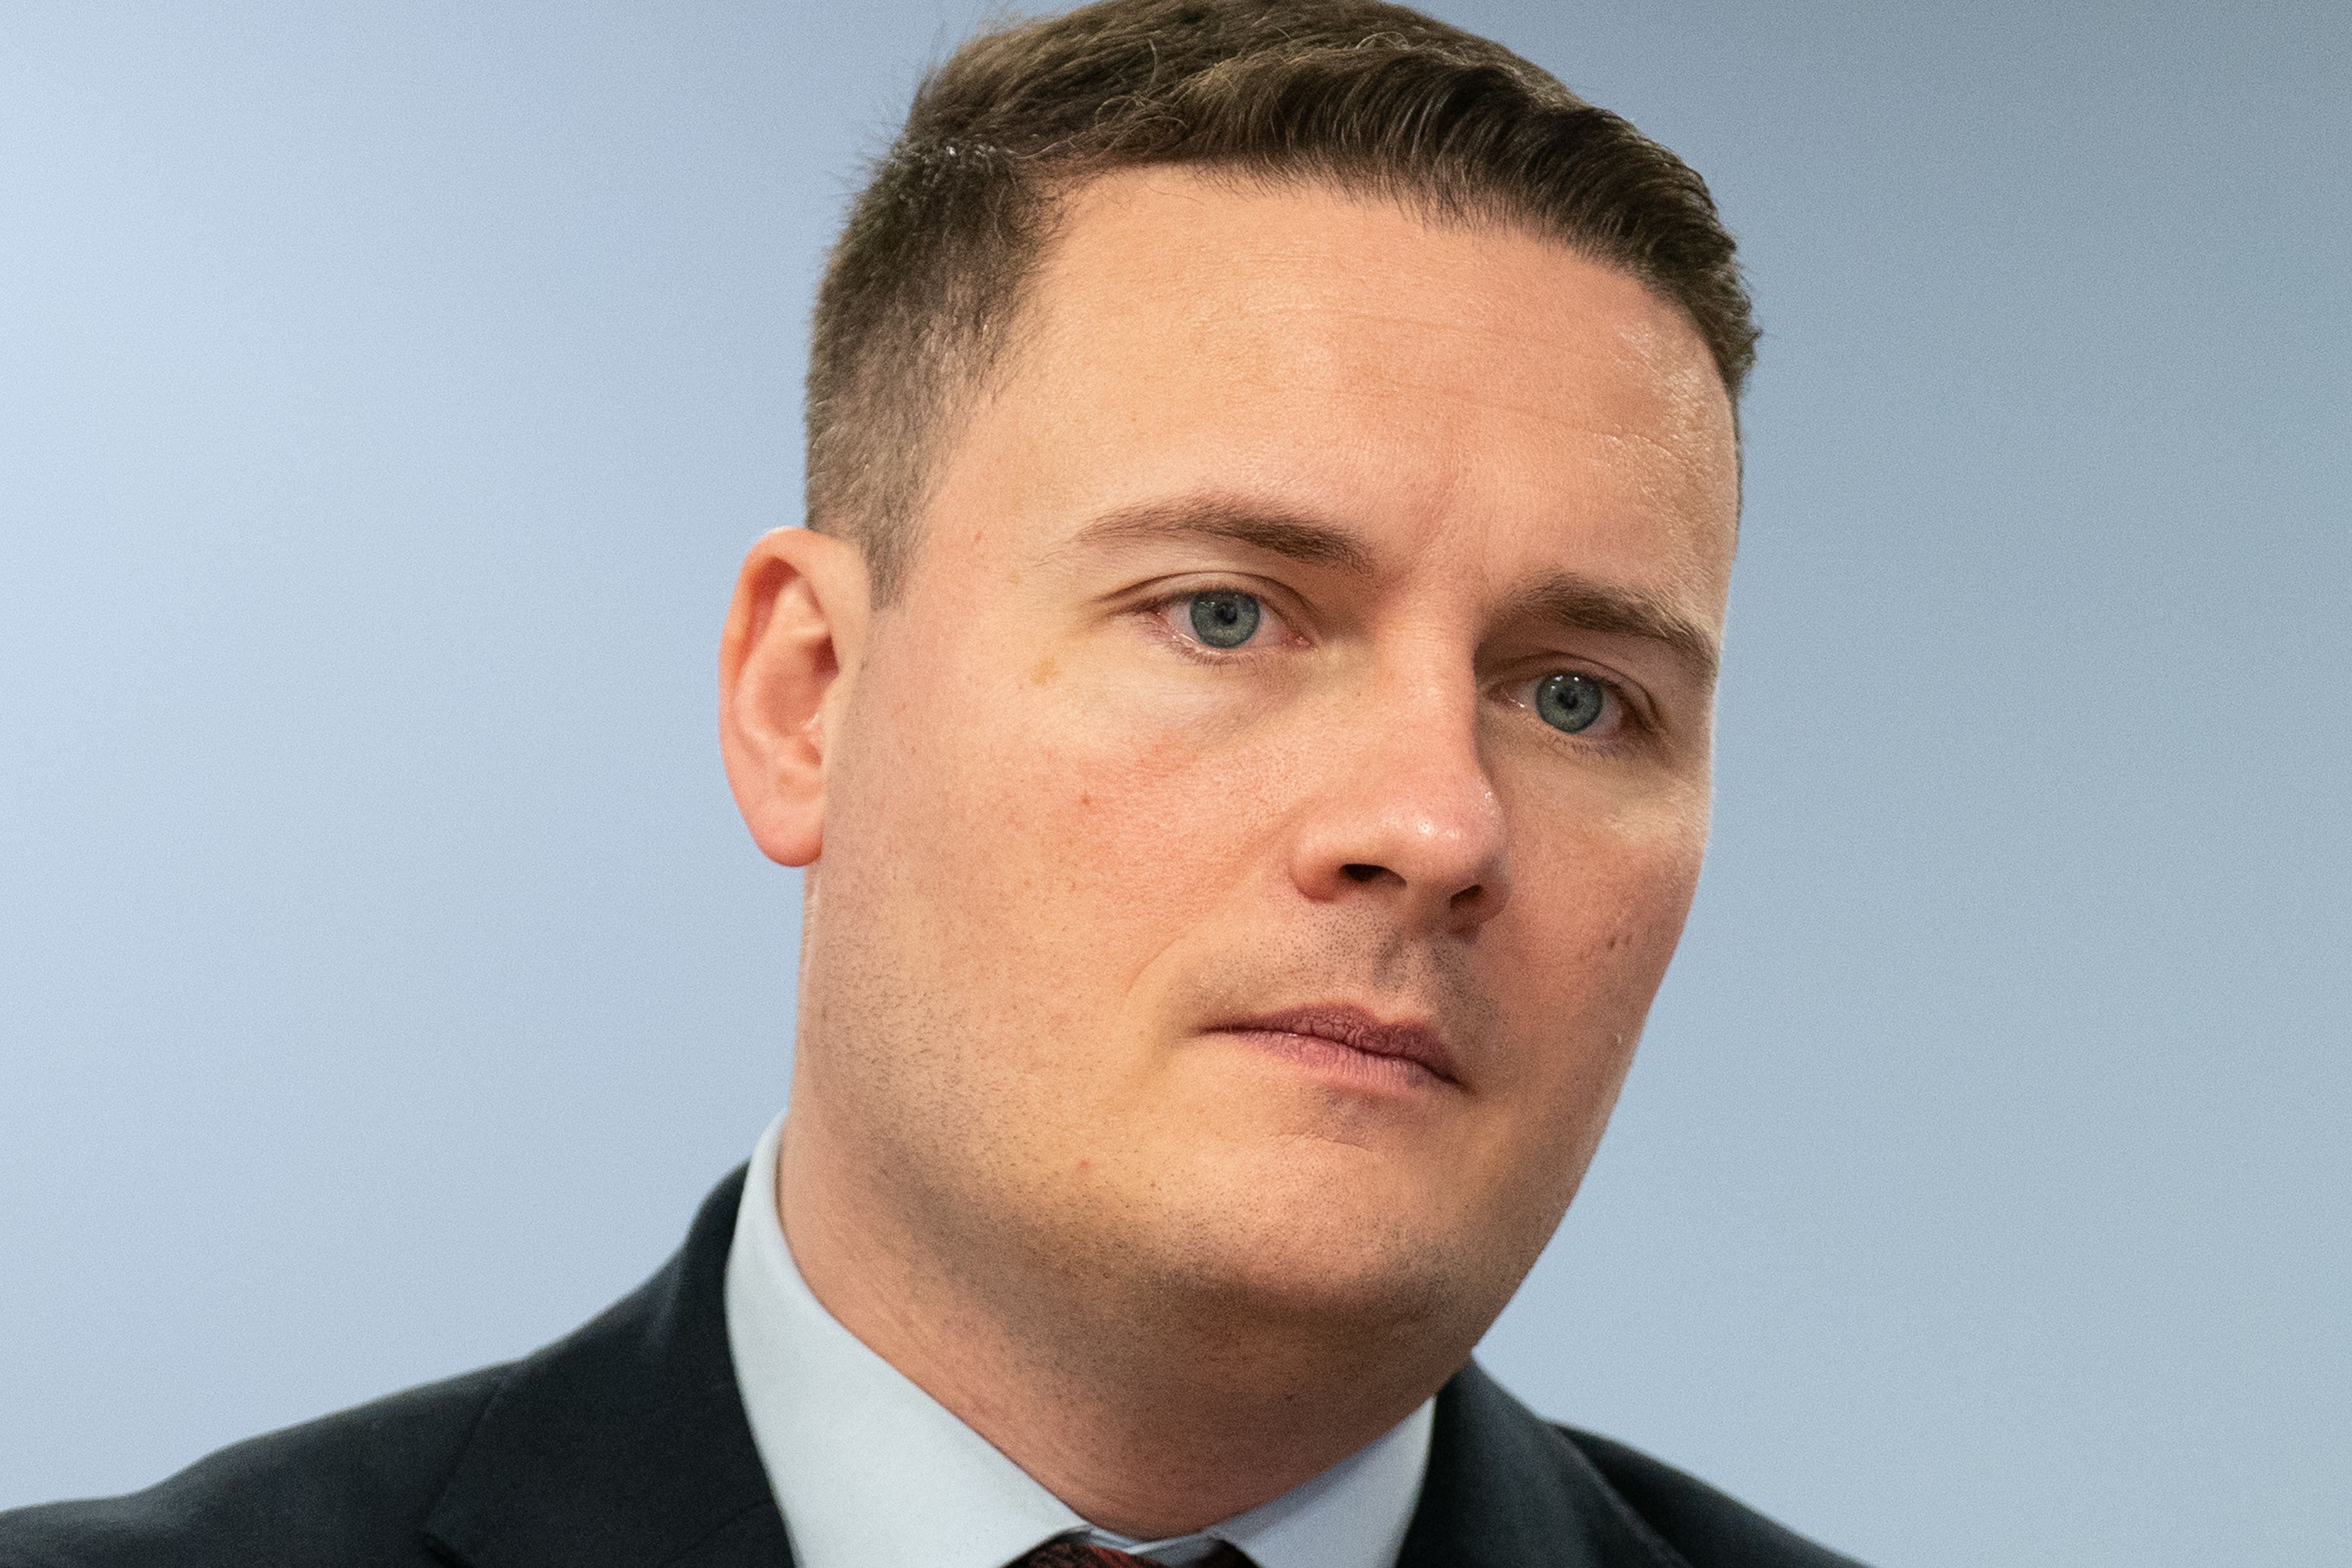 Labour’s Wes Streeting say Tories now admit ‘it’s going to get worse’